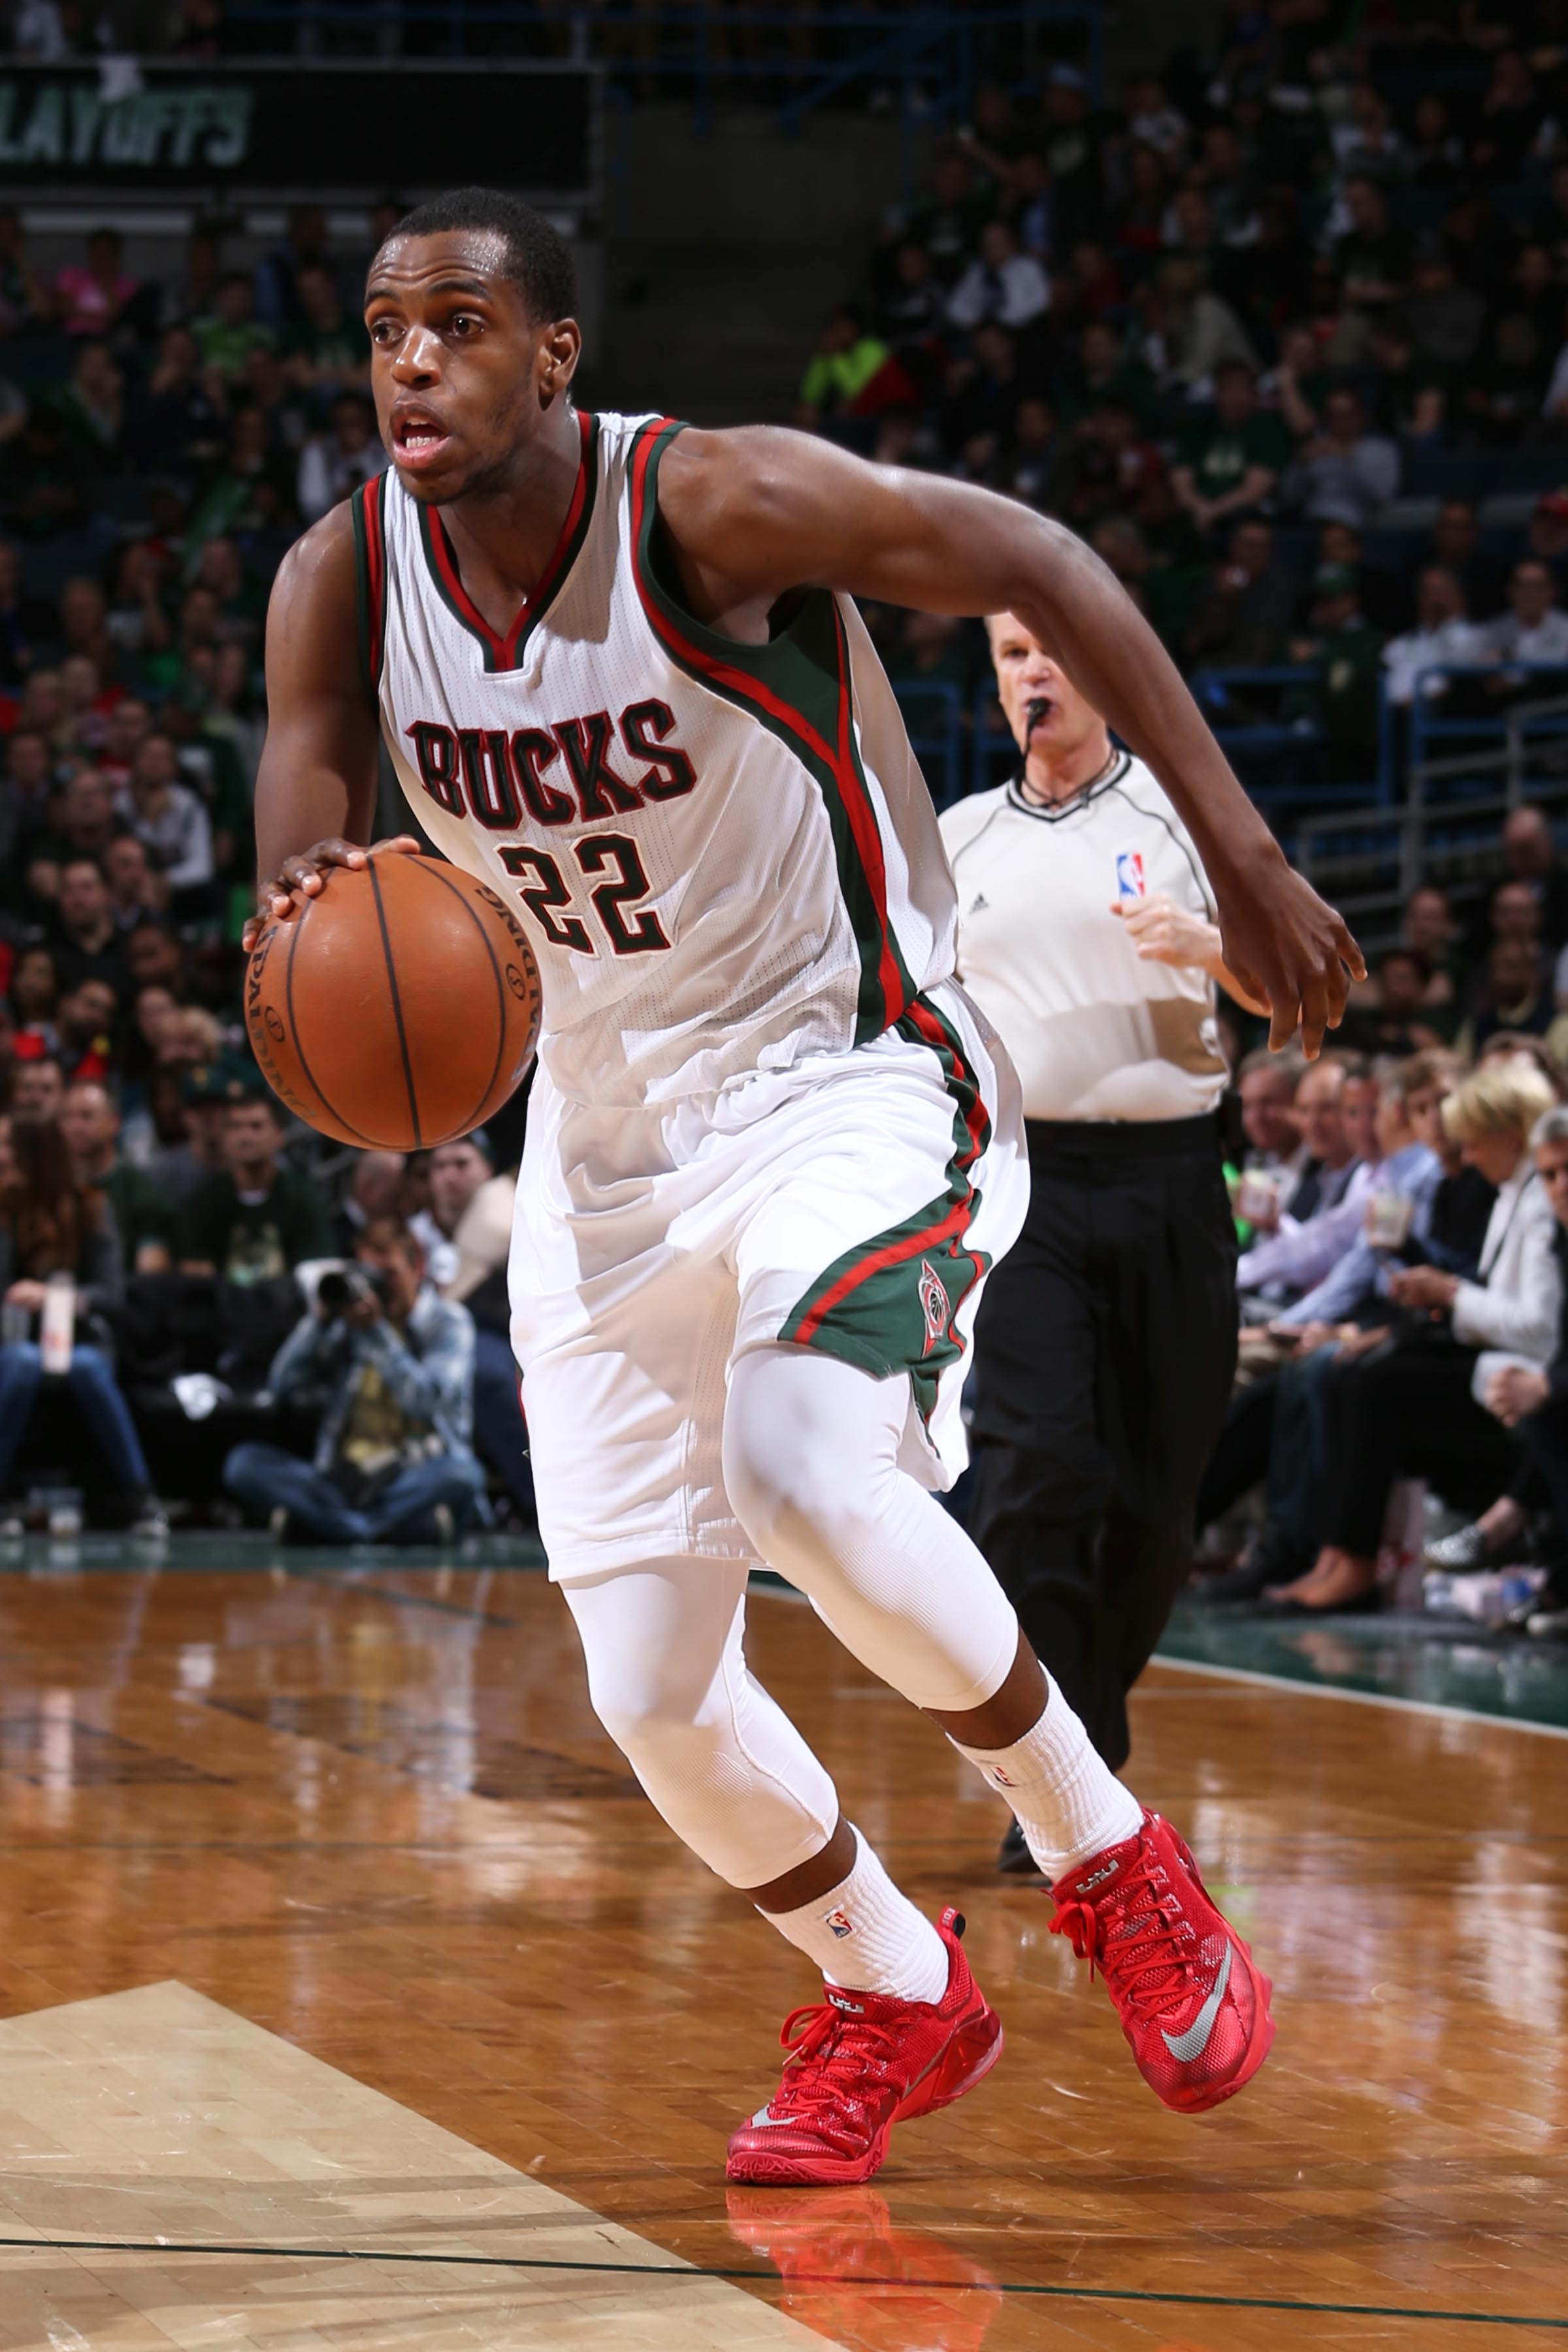 Khris Middleton got five years and $70 million to make a two-way difference. (Gary Dineen/NBAE/Getty Images)